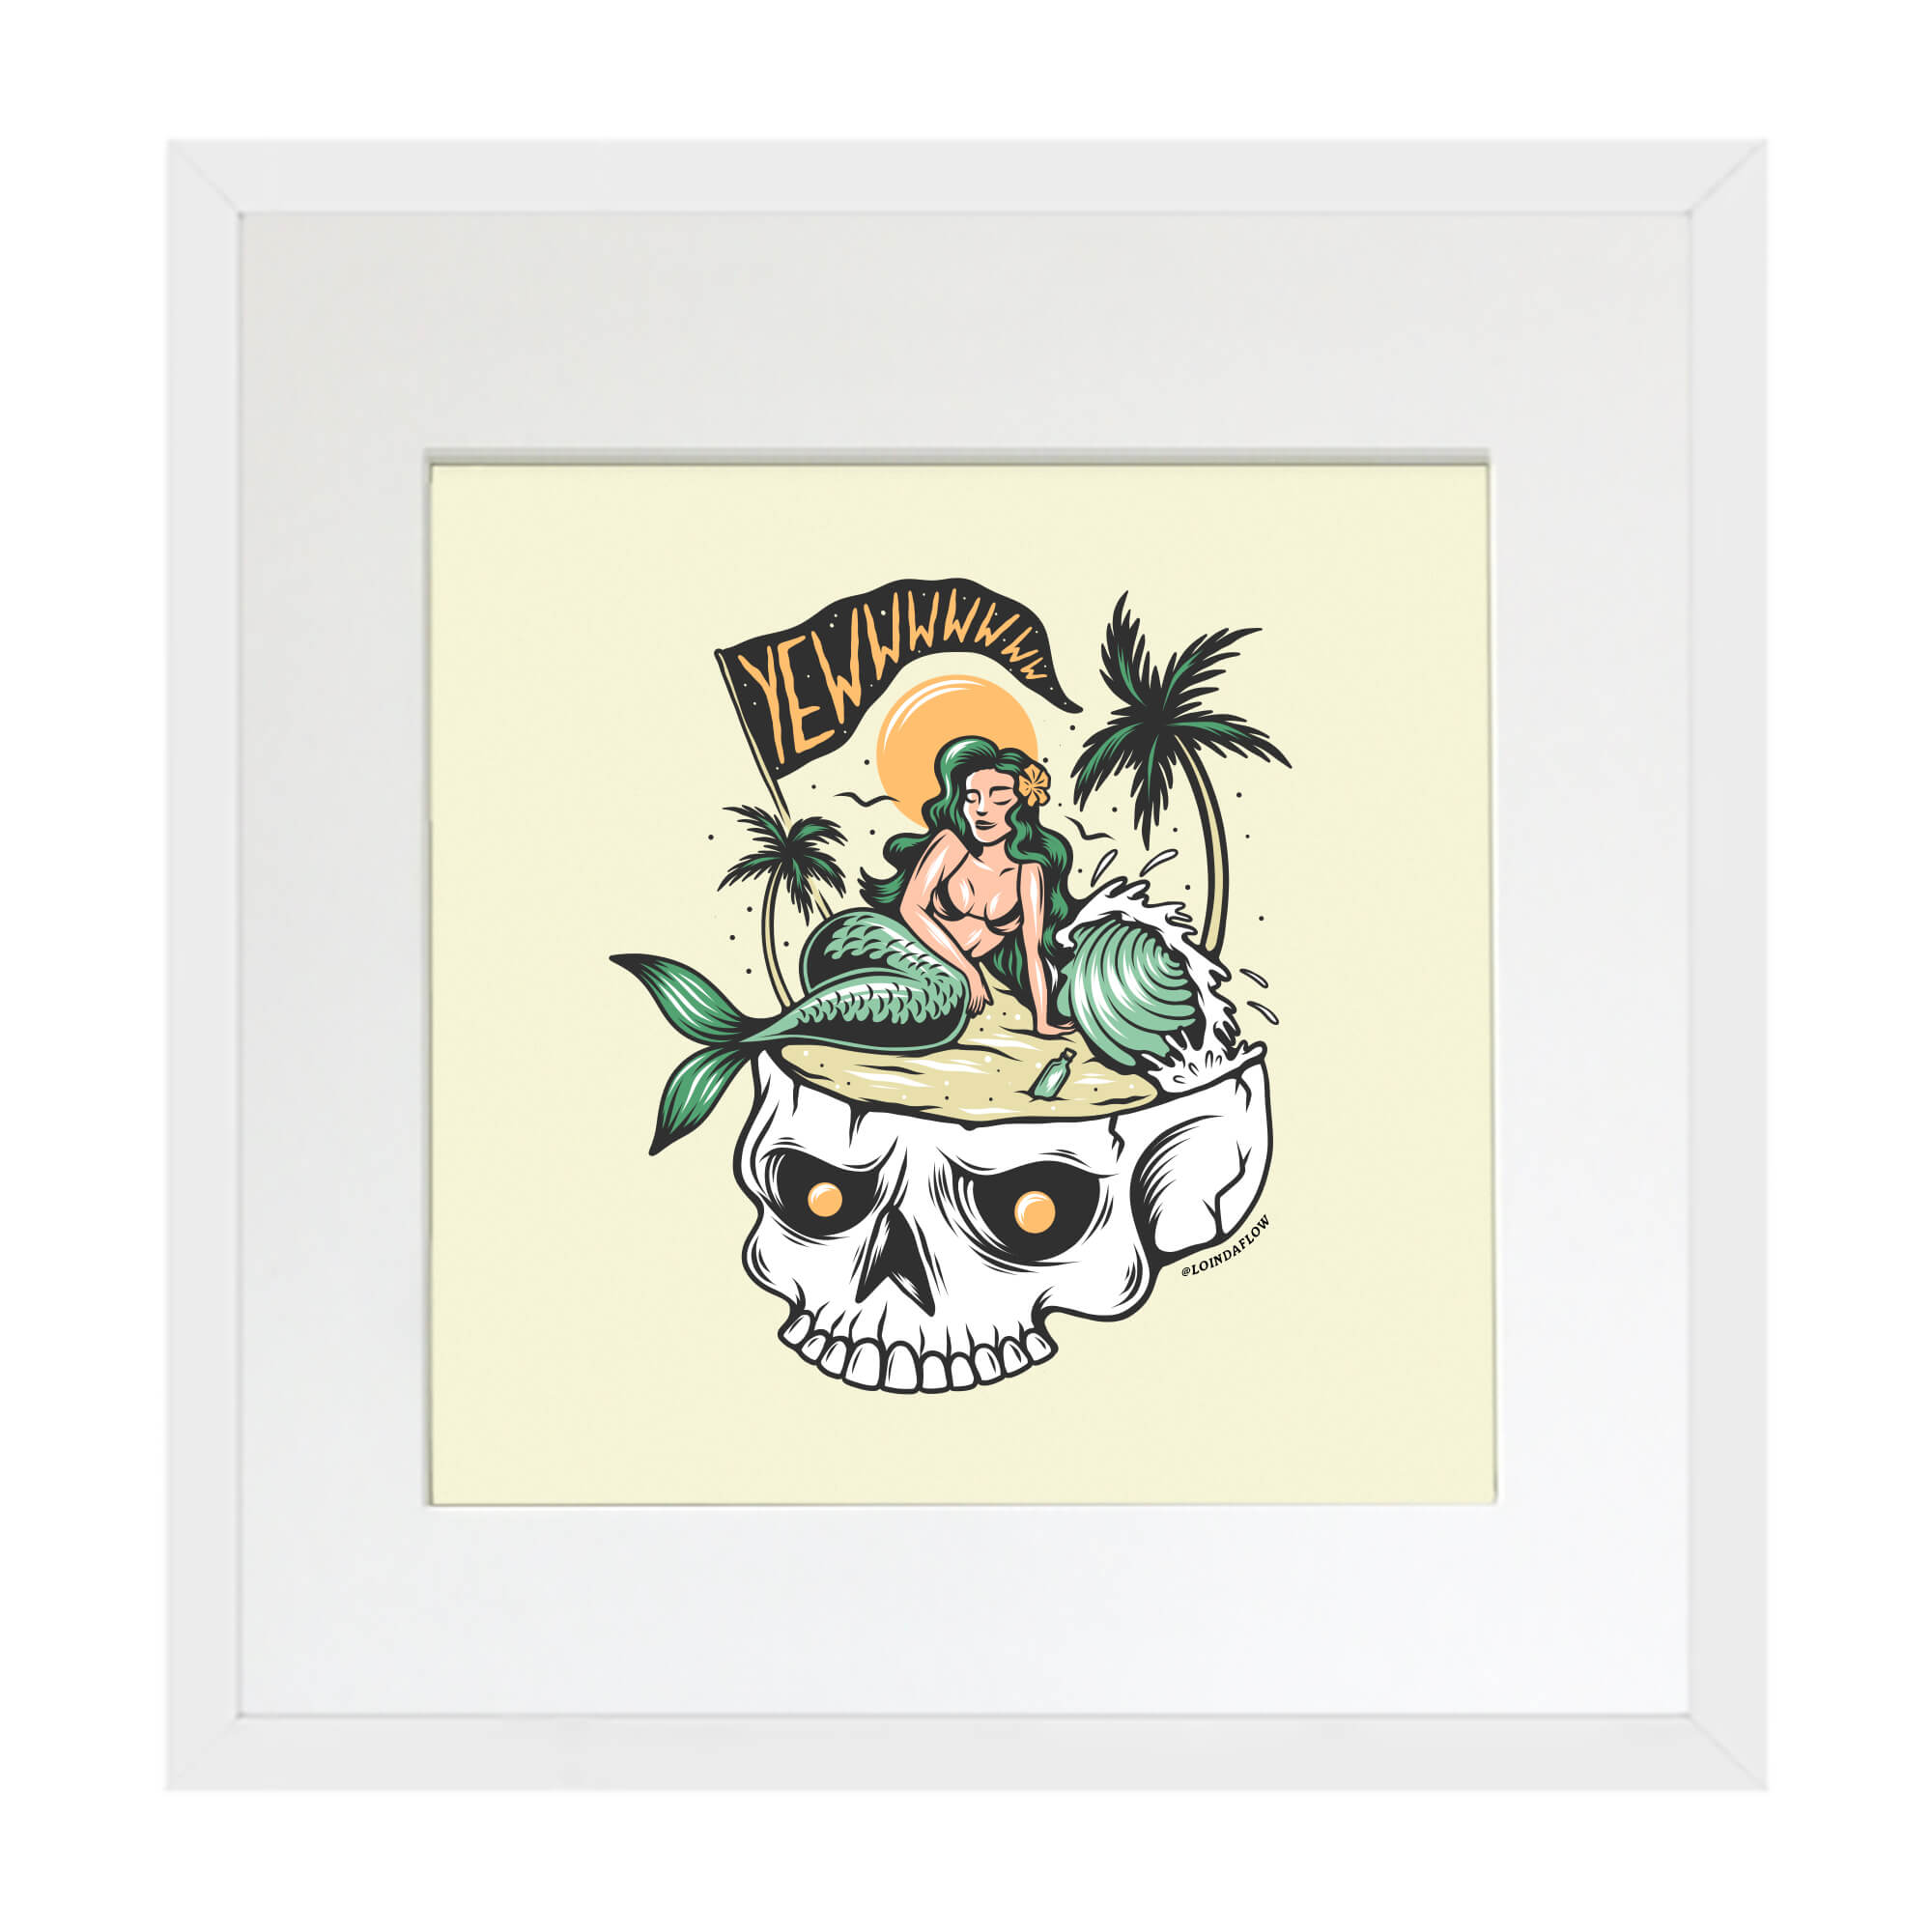 A matted art print with white frame of a mermaid illustration on a skull island by Hawaii artist Laihha Organna